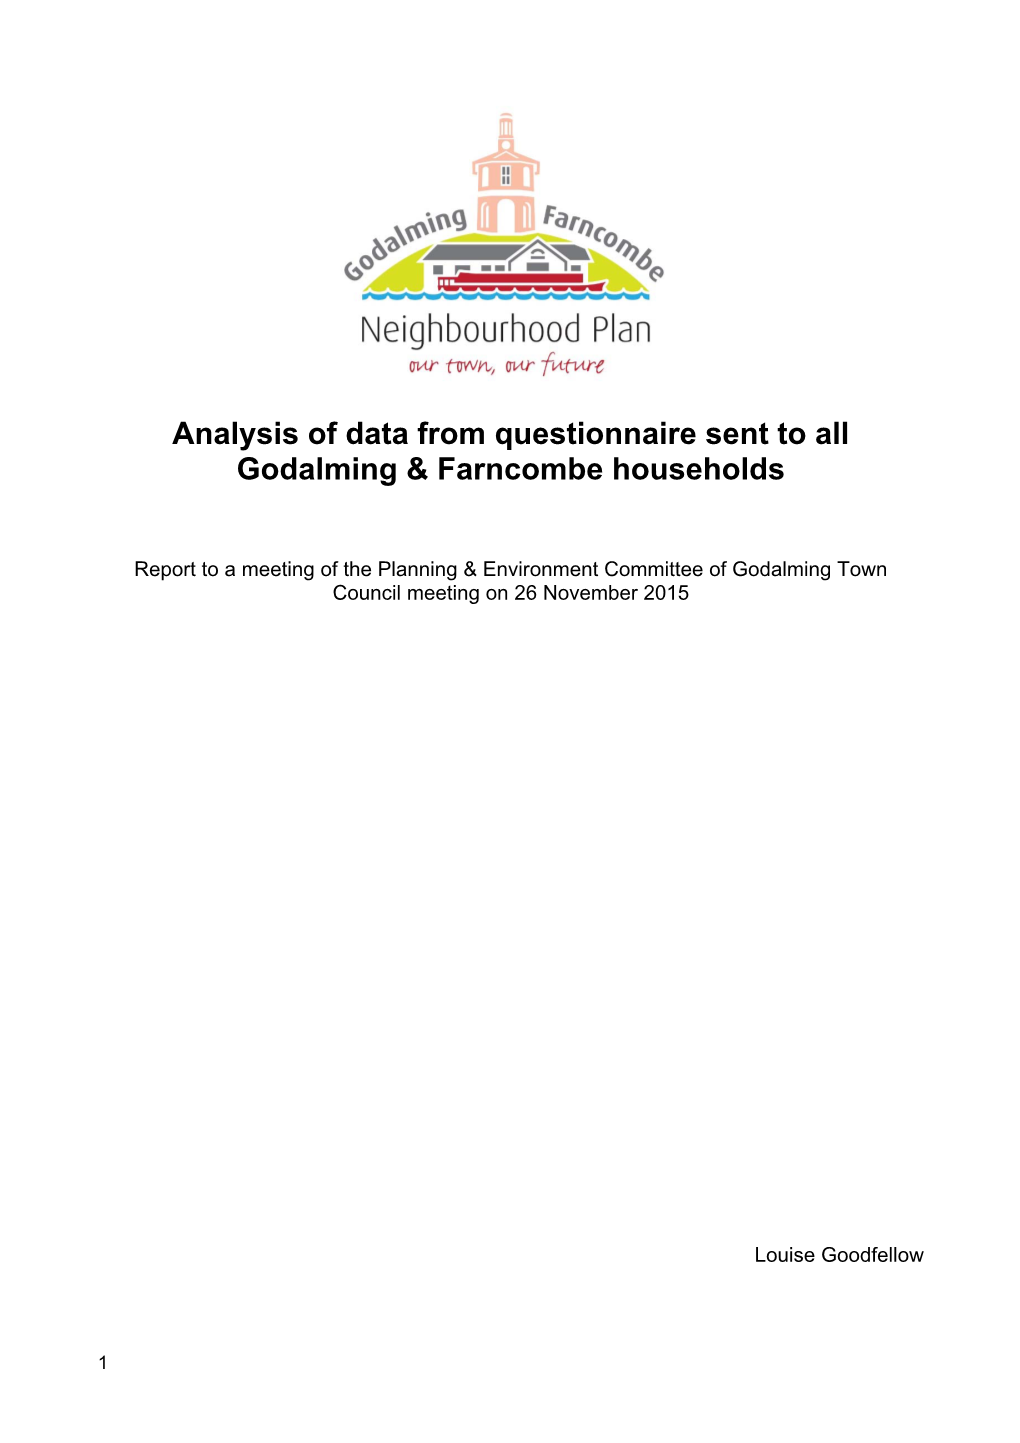 Analysis of Data from Questionnaire Sent to All Godalming & Farncombe